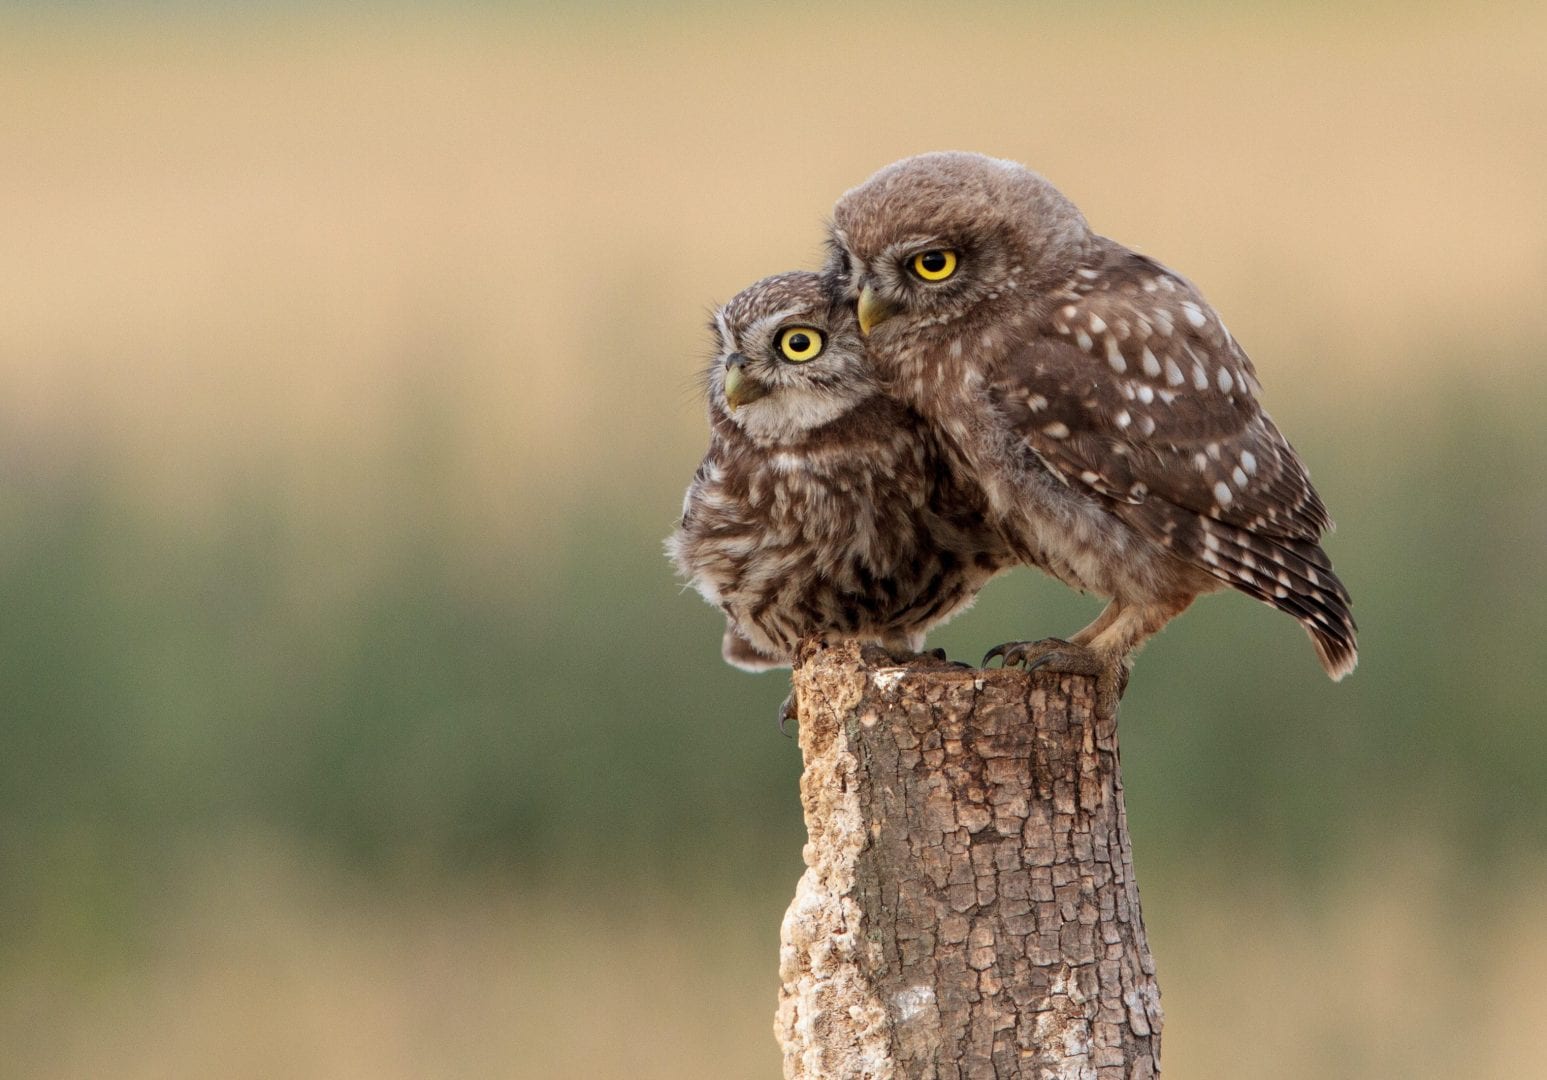 a parent owl and a baby owl standing together on a stump